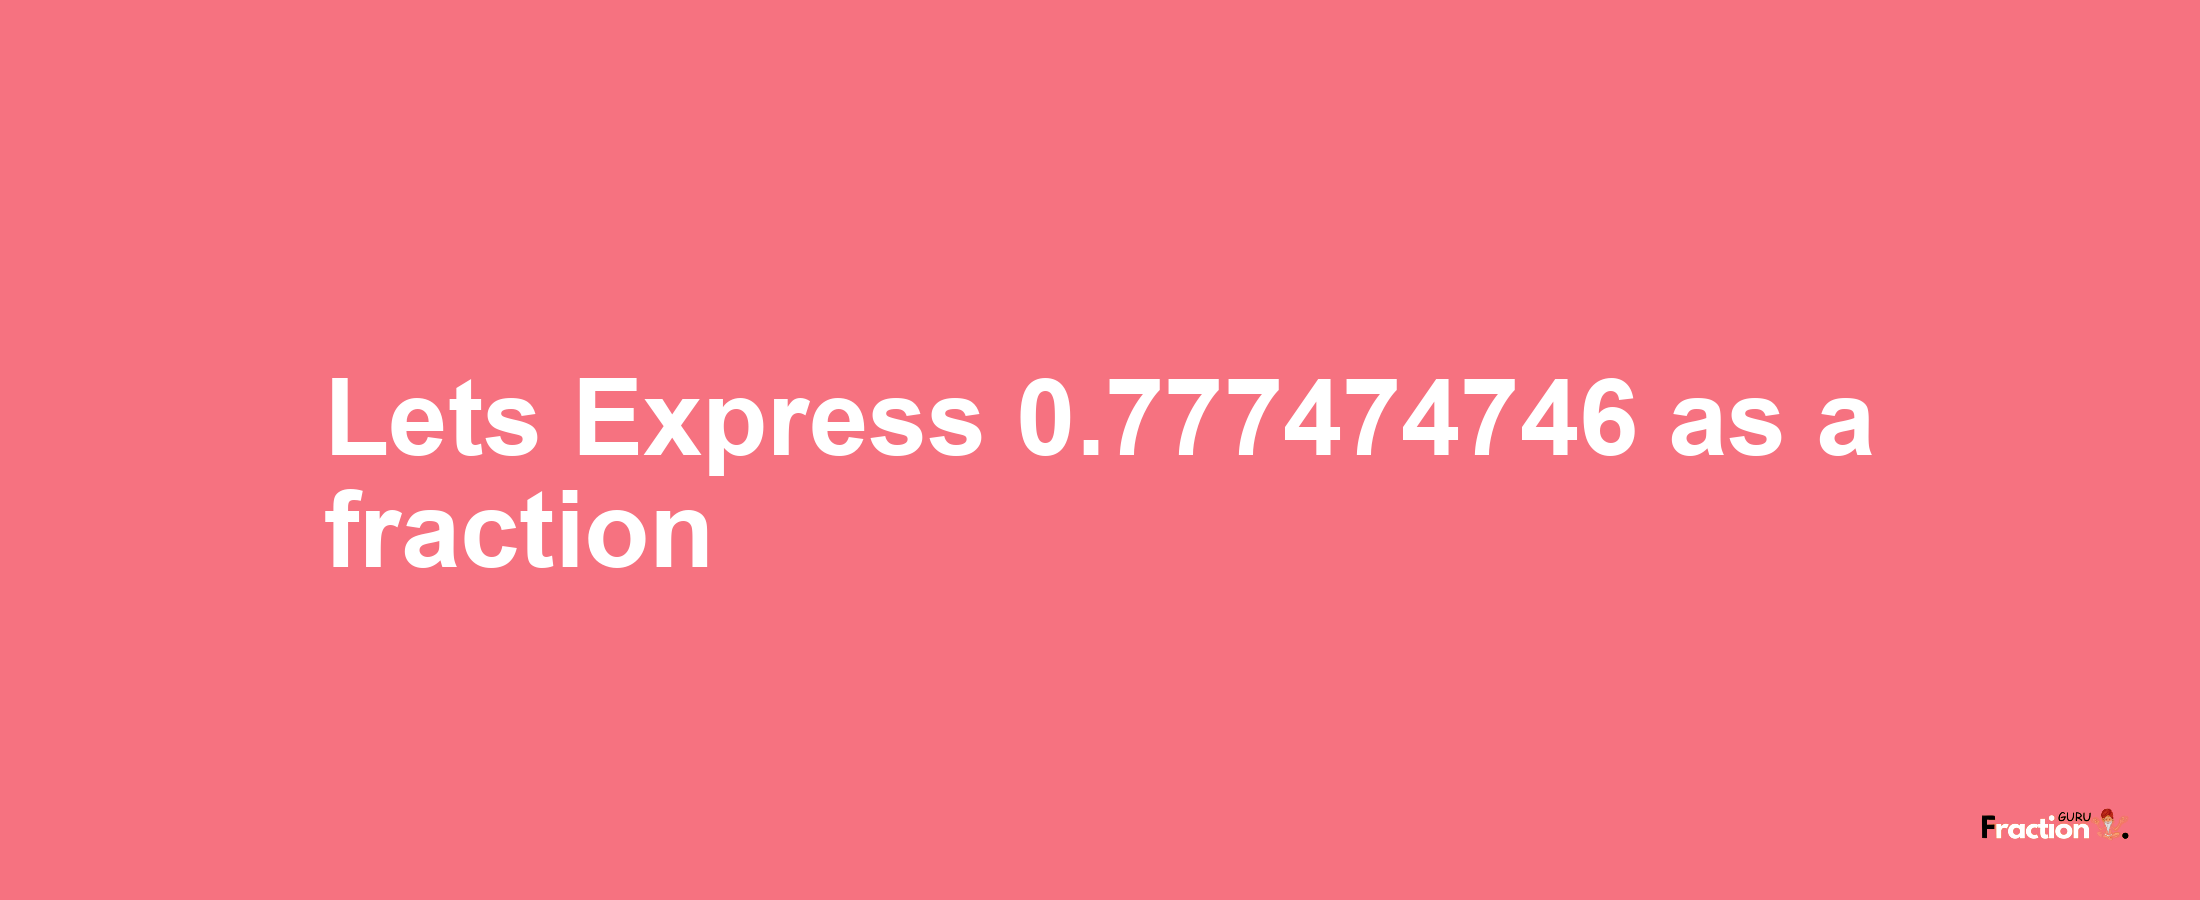 Lets Express 0.777474746 as afraction